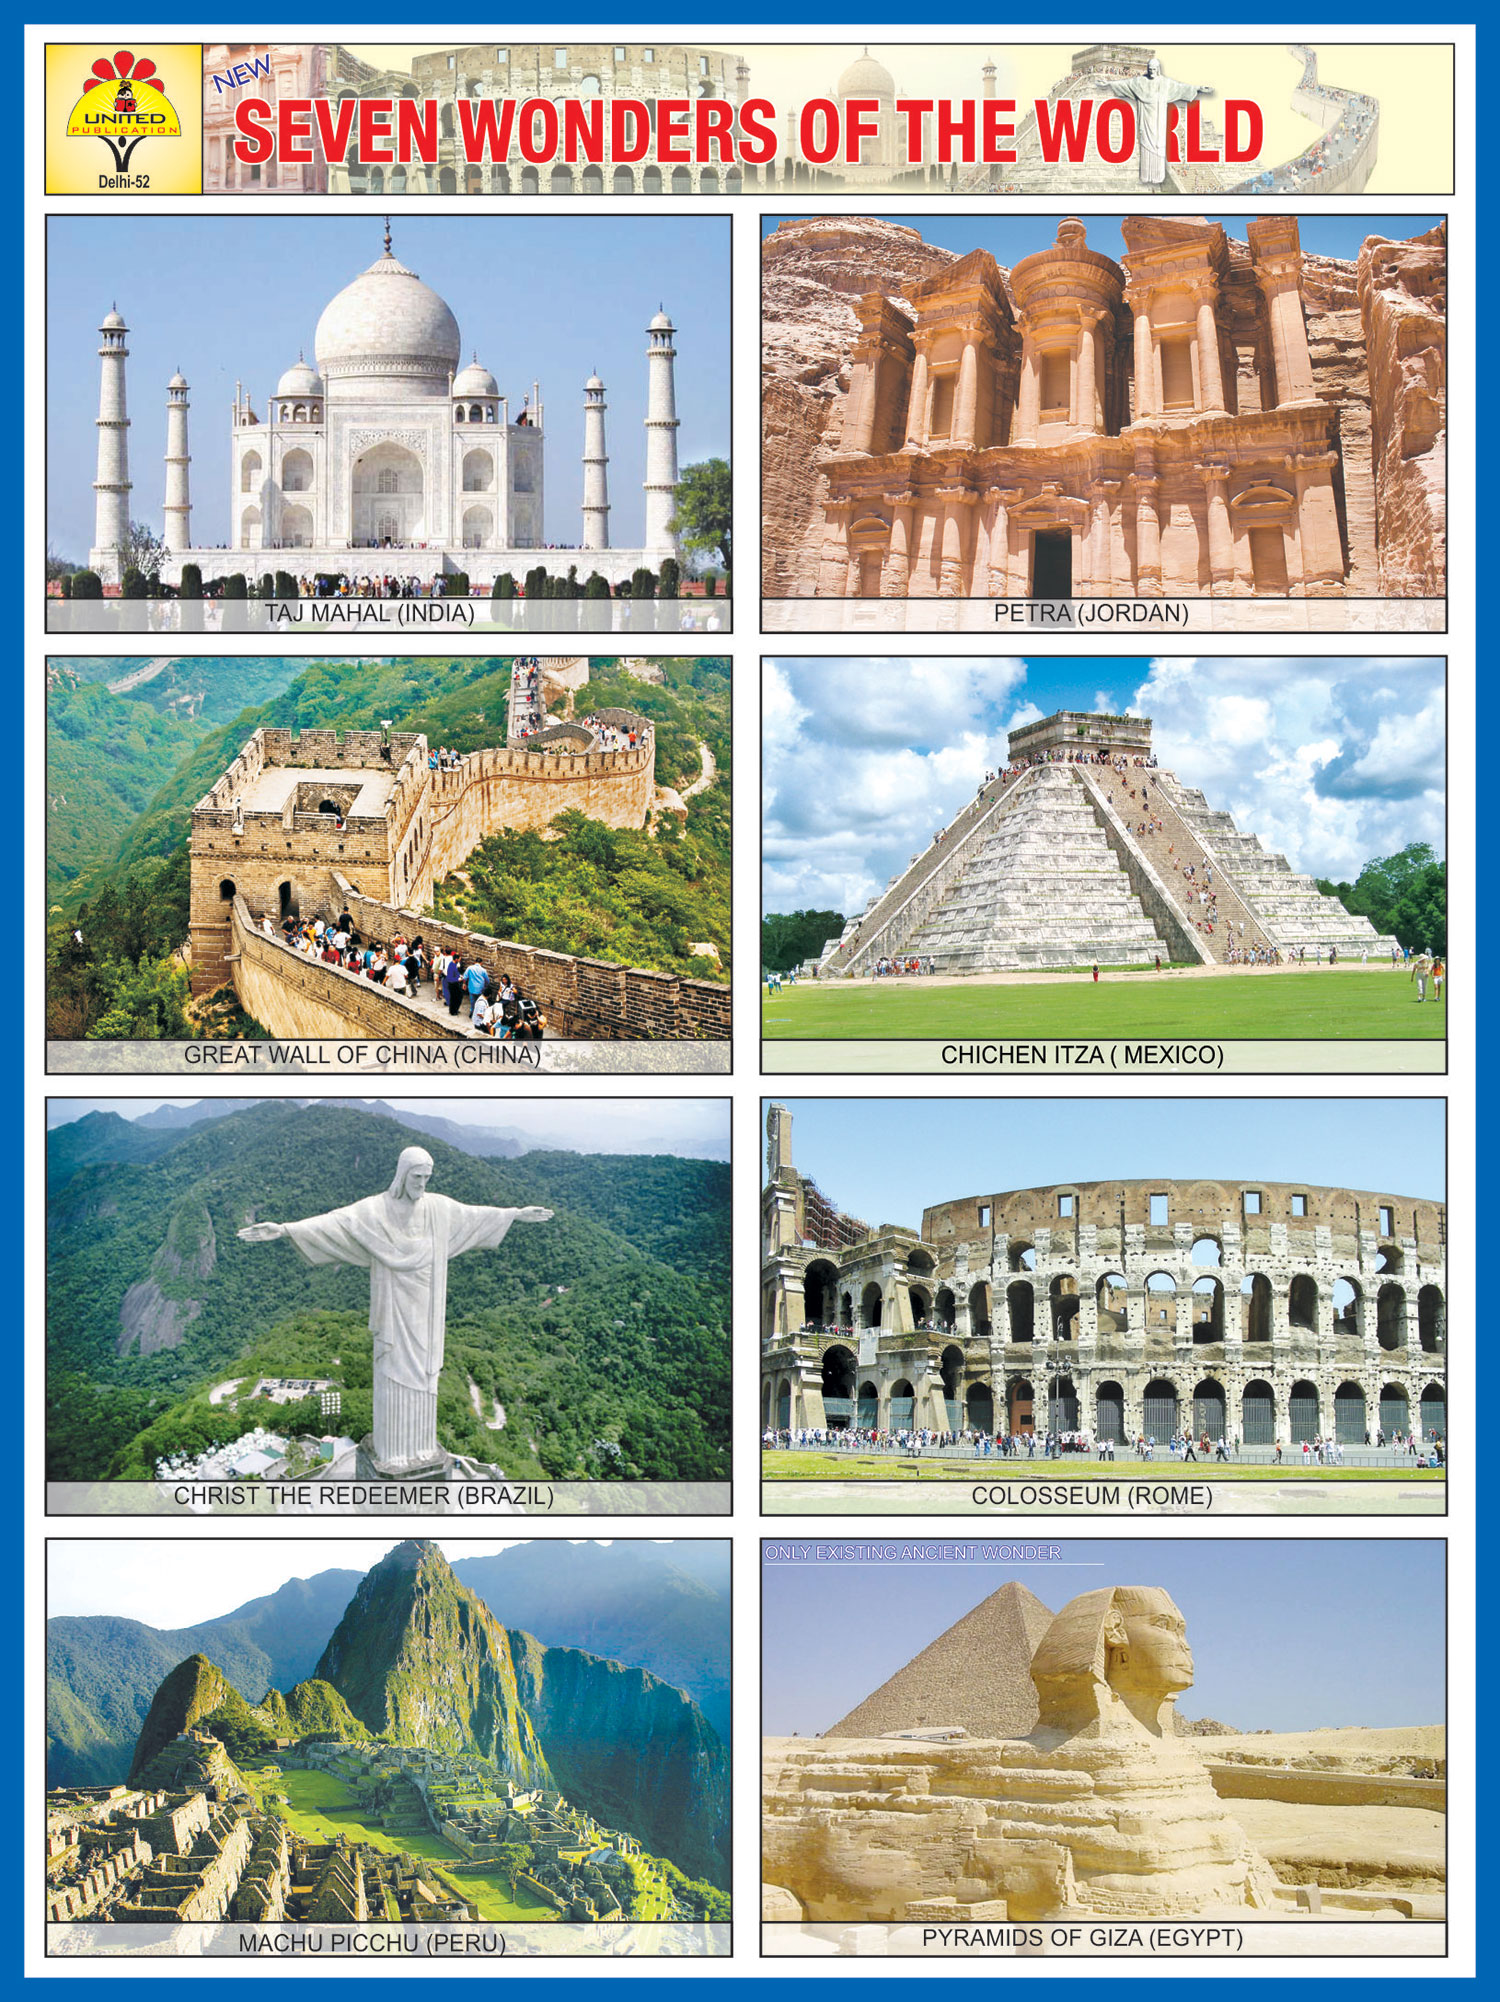 7 Wonders Of The World Pictures With Names